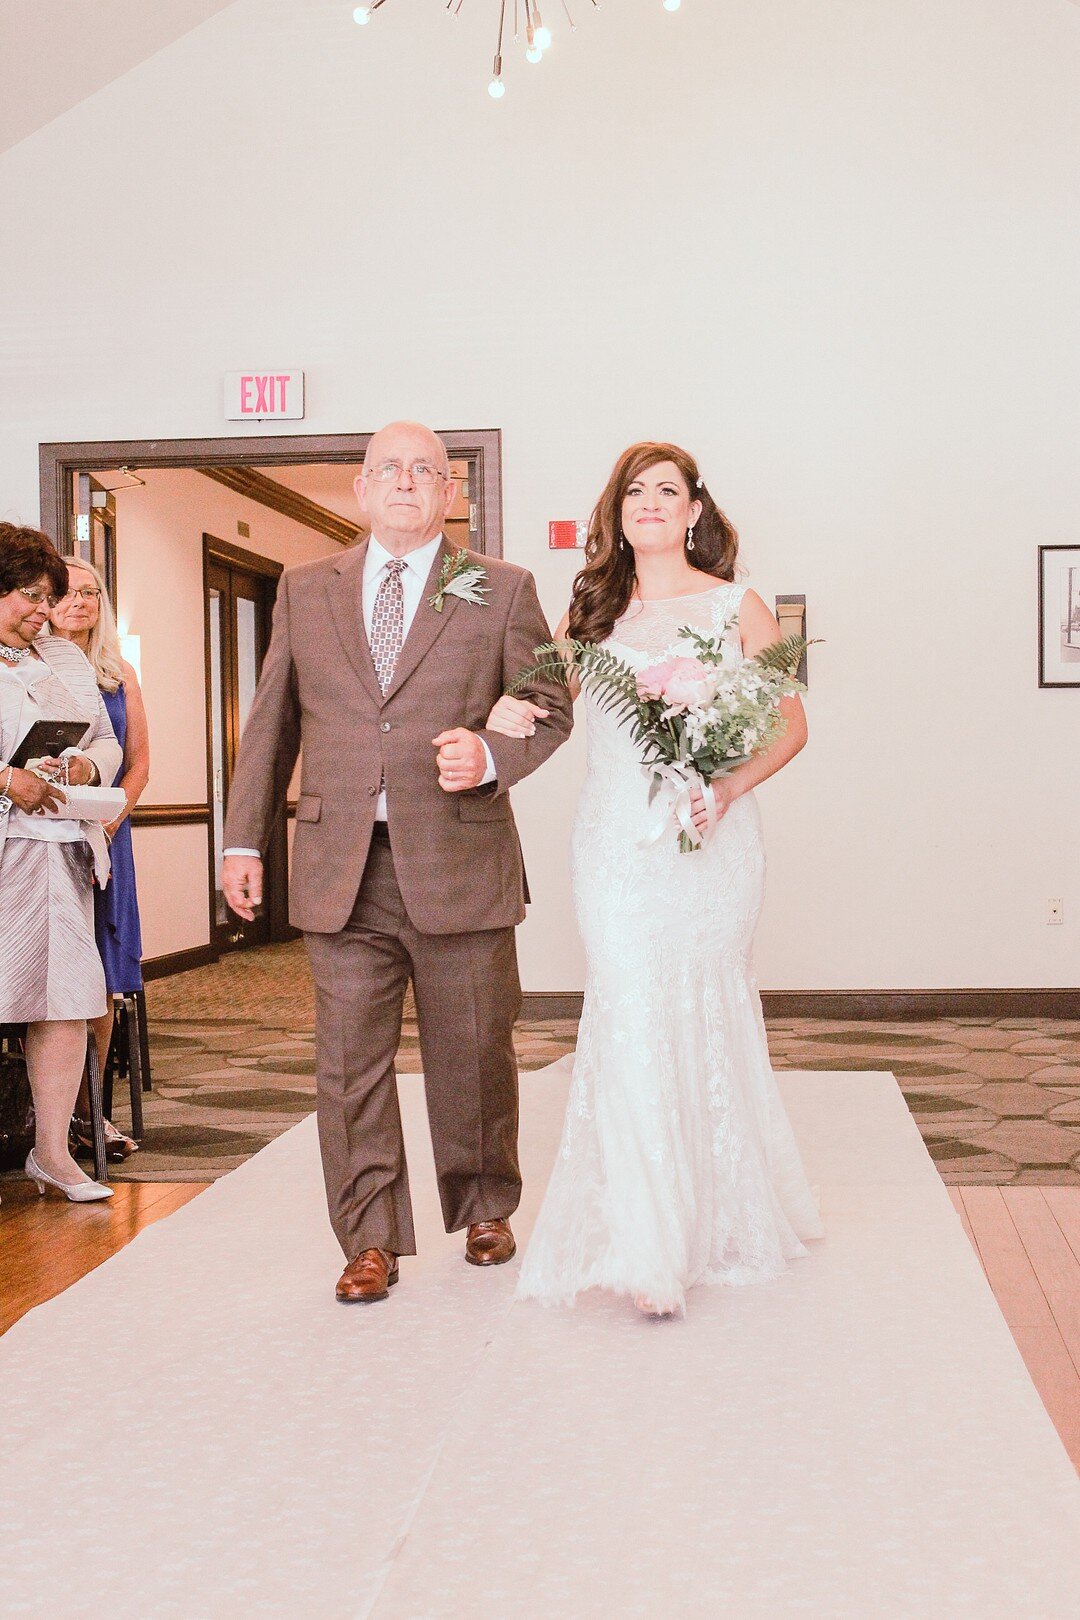 Nestled in Gibsonia, Pennsylvania- The Treesdale Golf &amp; Country Club provided the lush setting for the wedding day. Photographed by Aly Brooke Photography.